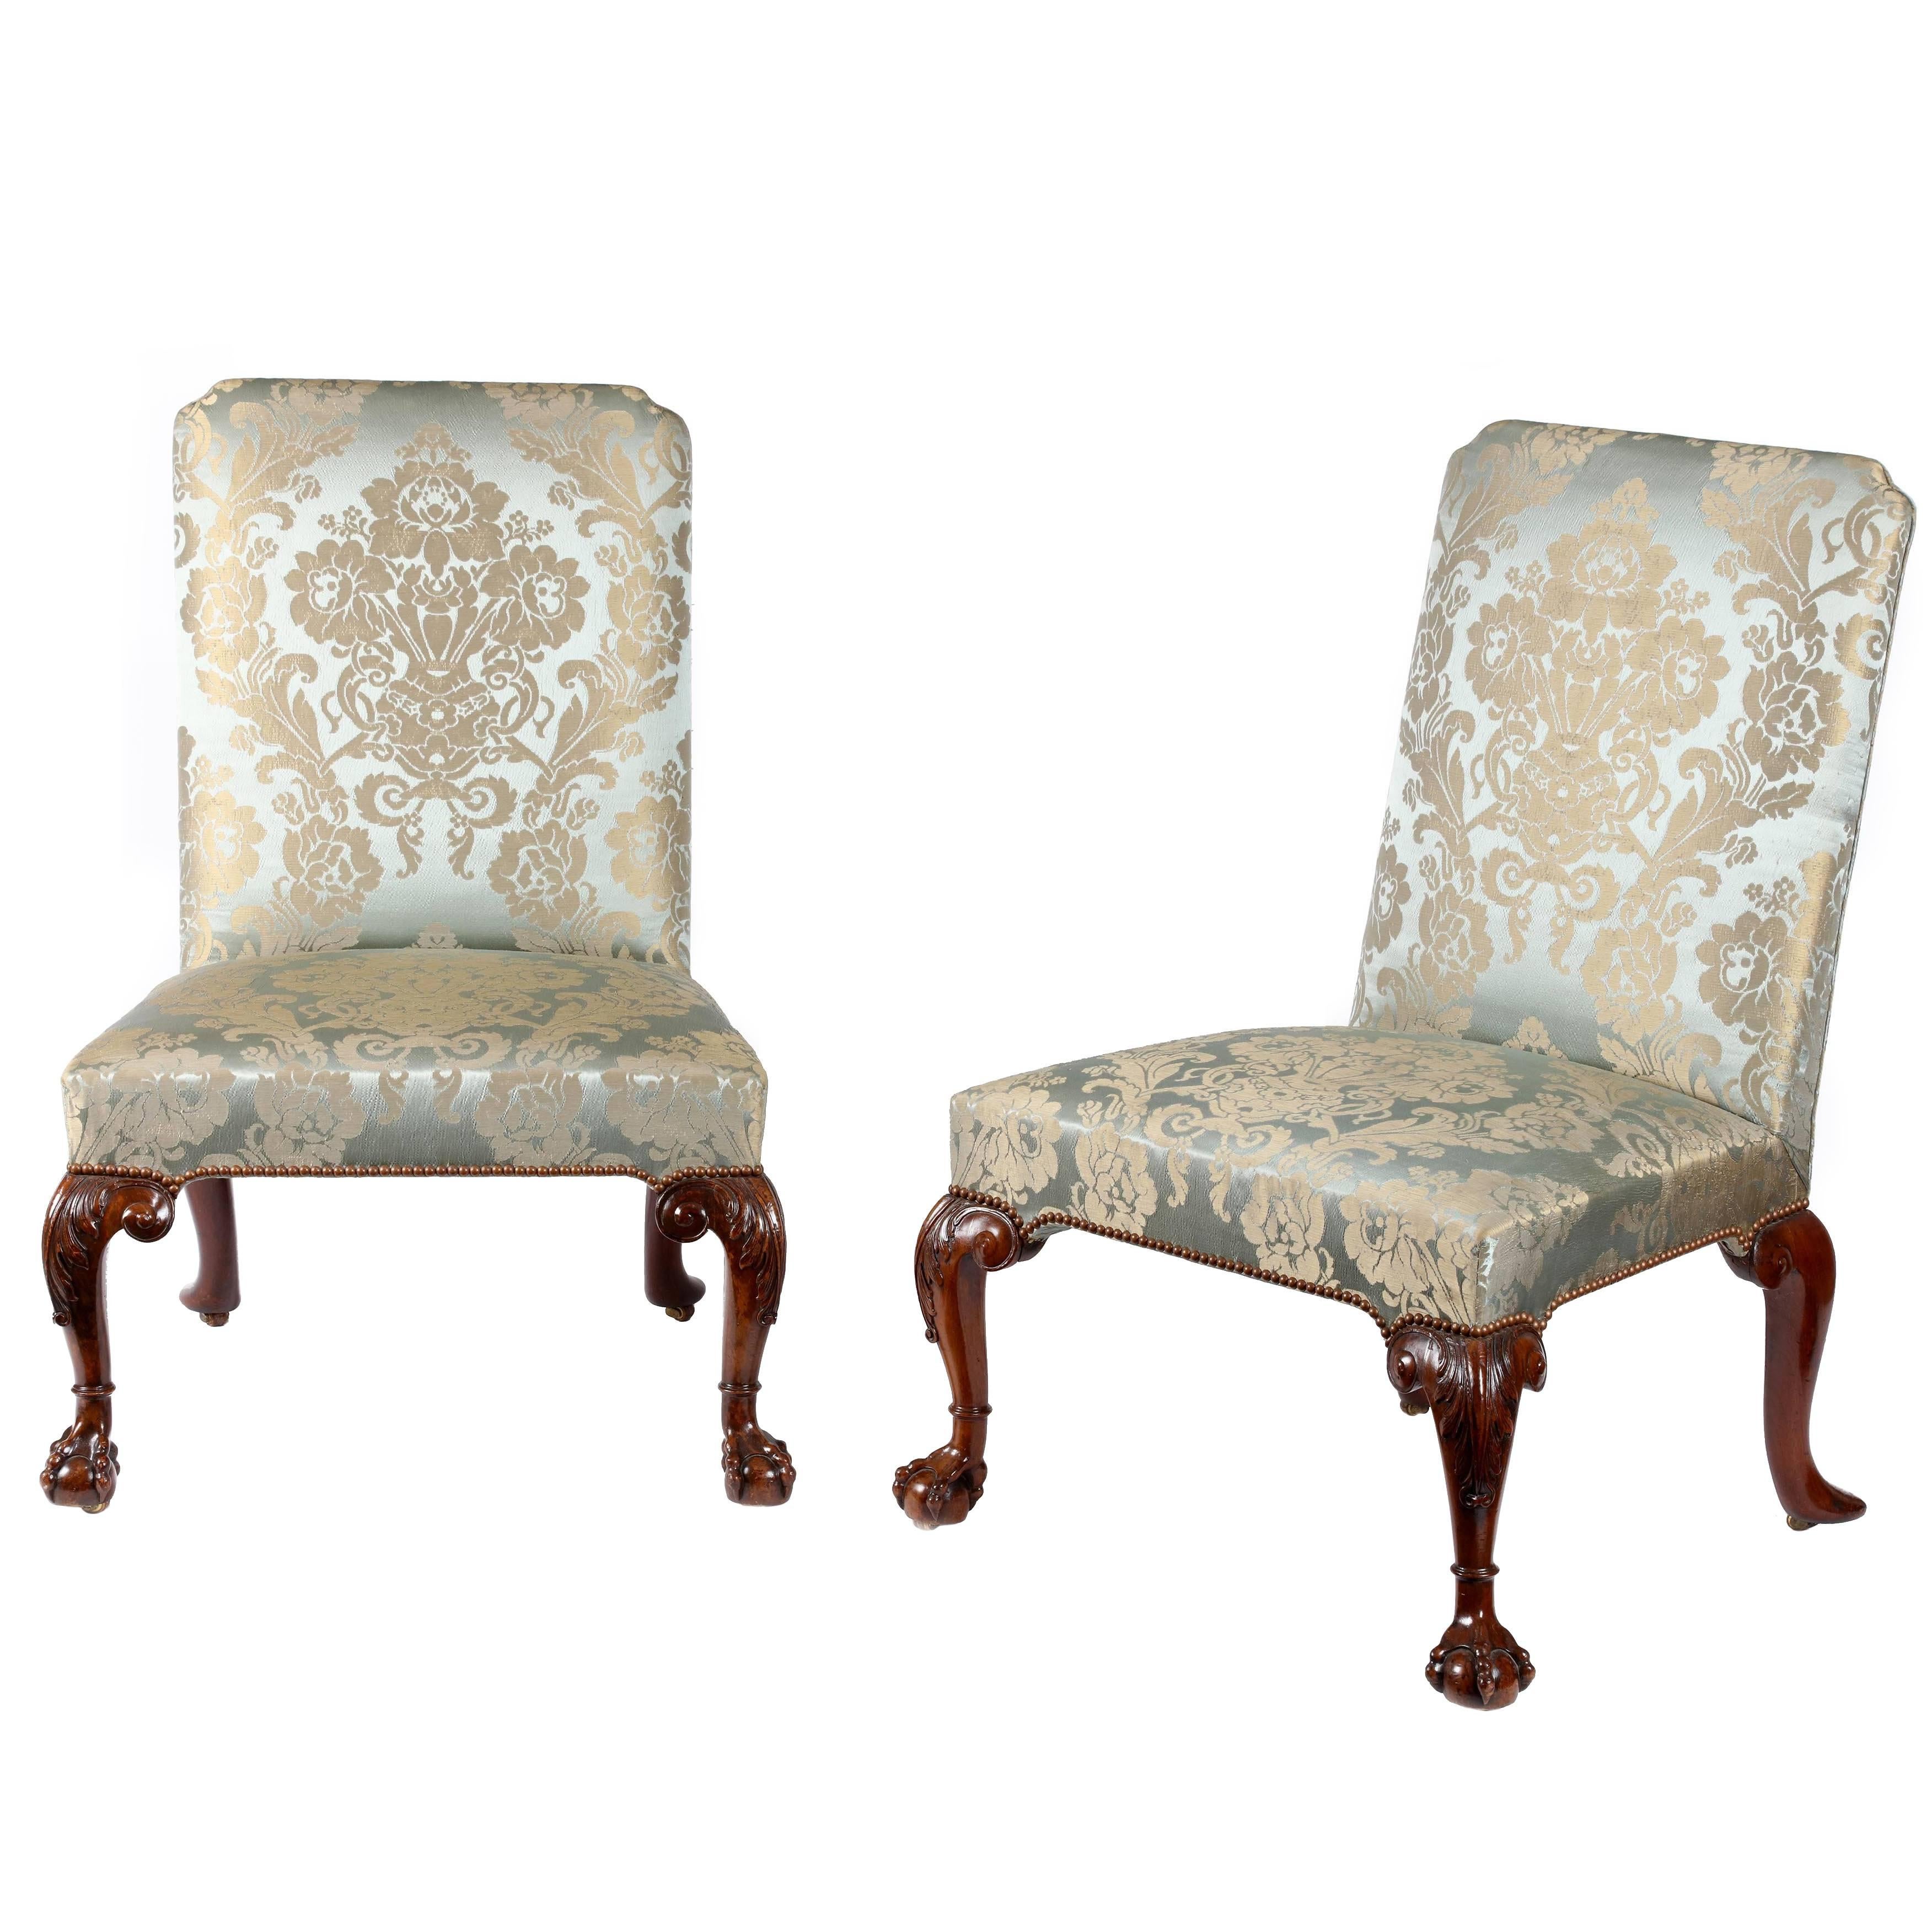 Pair of George II Carved Walnut Side Chairs Attributed to William Hallet For Sale